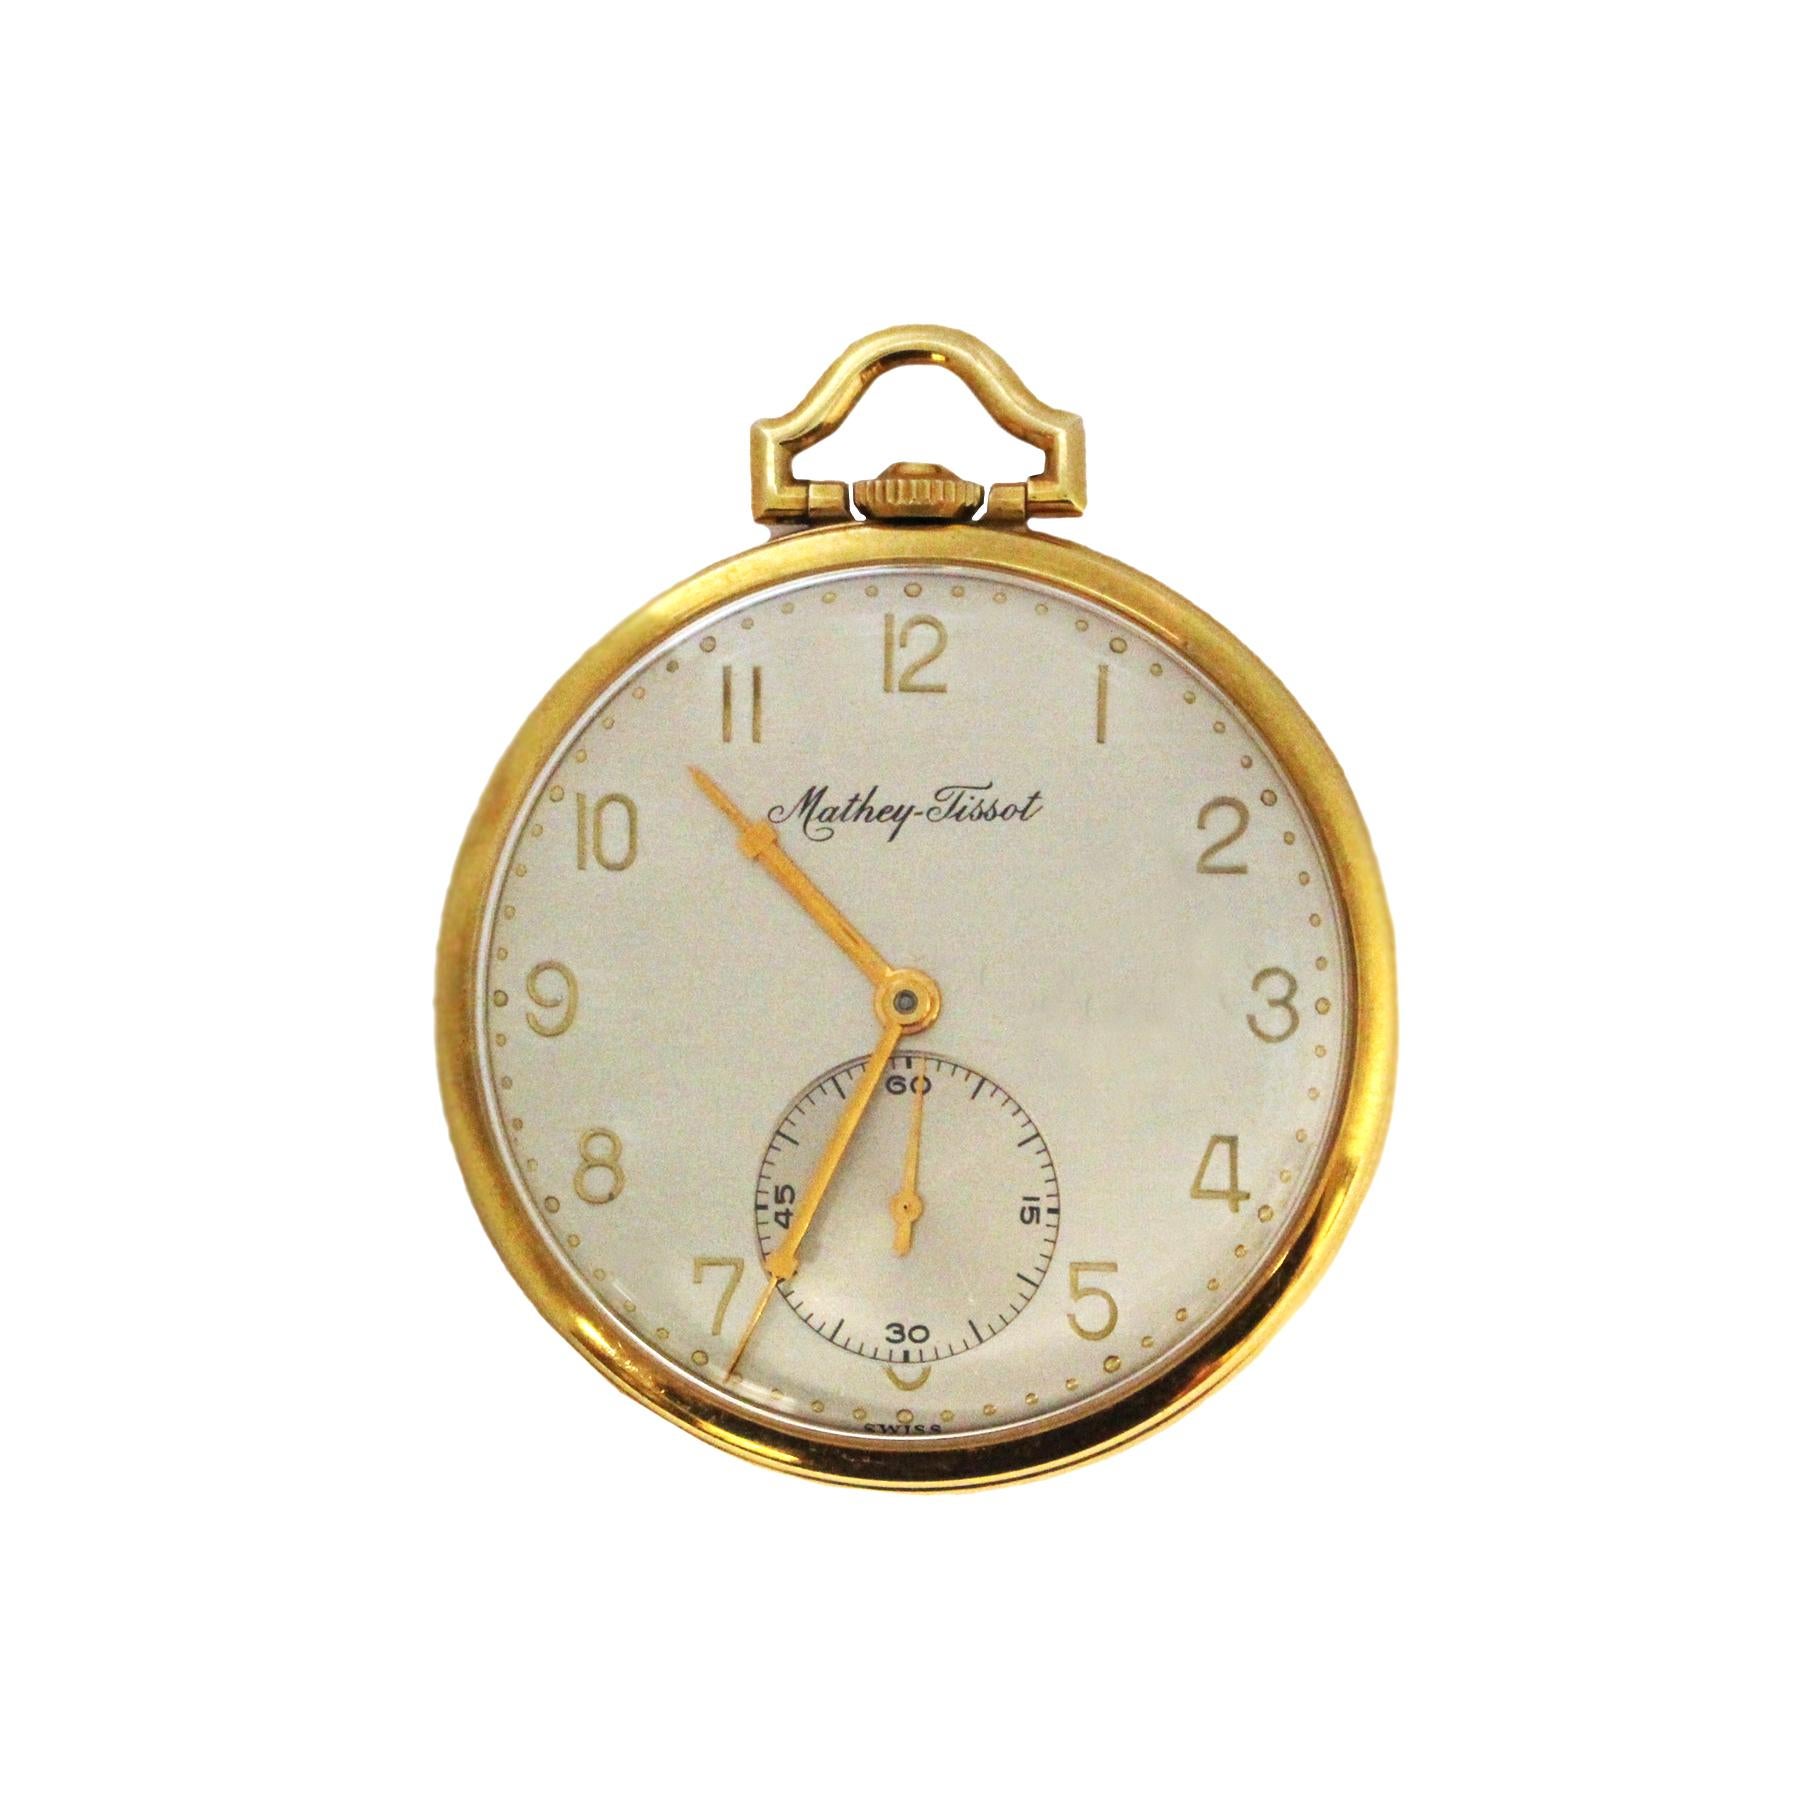 Mathey Tissot Yellow Gold Pocket Watch Owned and Worn by Jerry Lewis